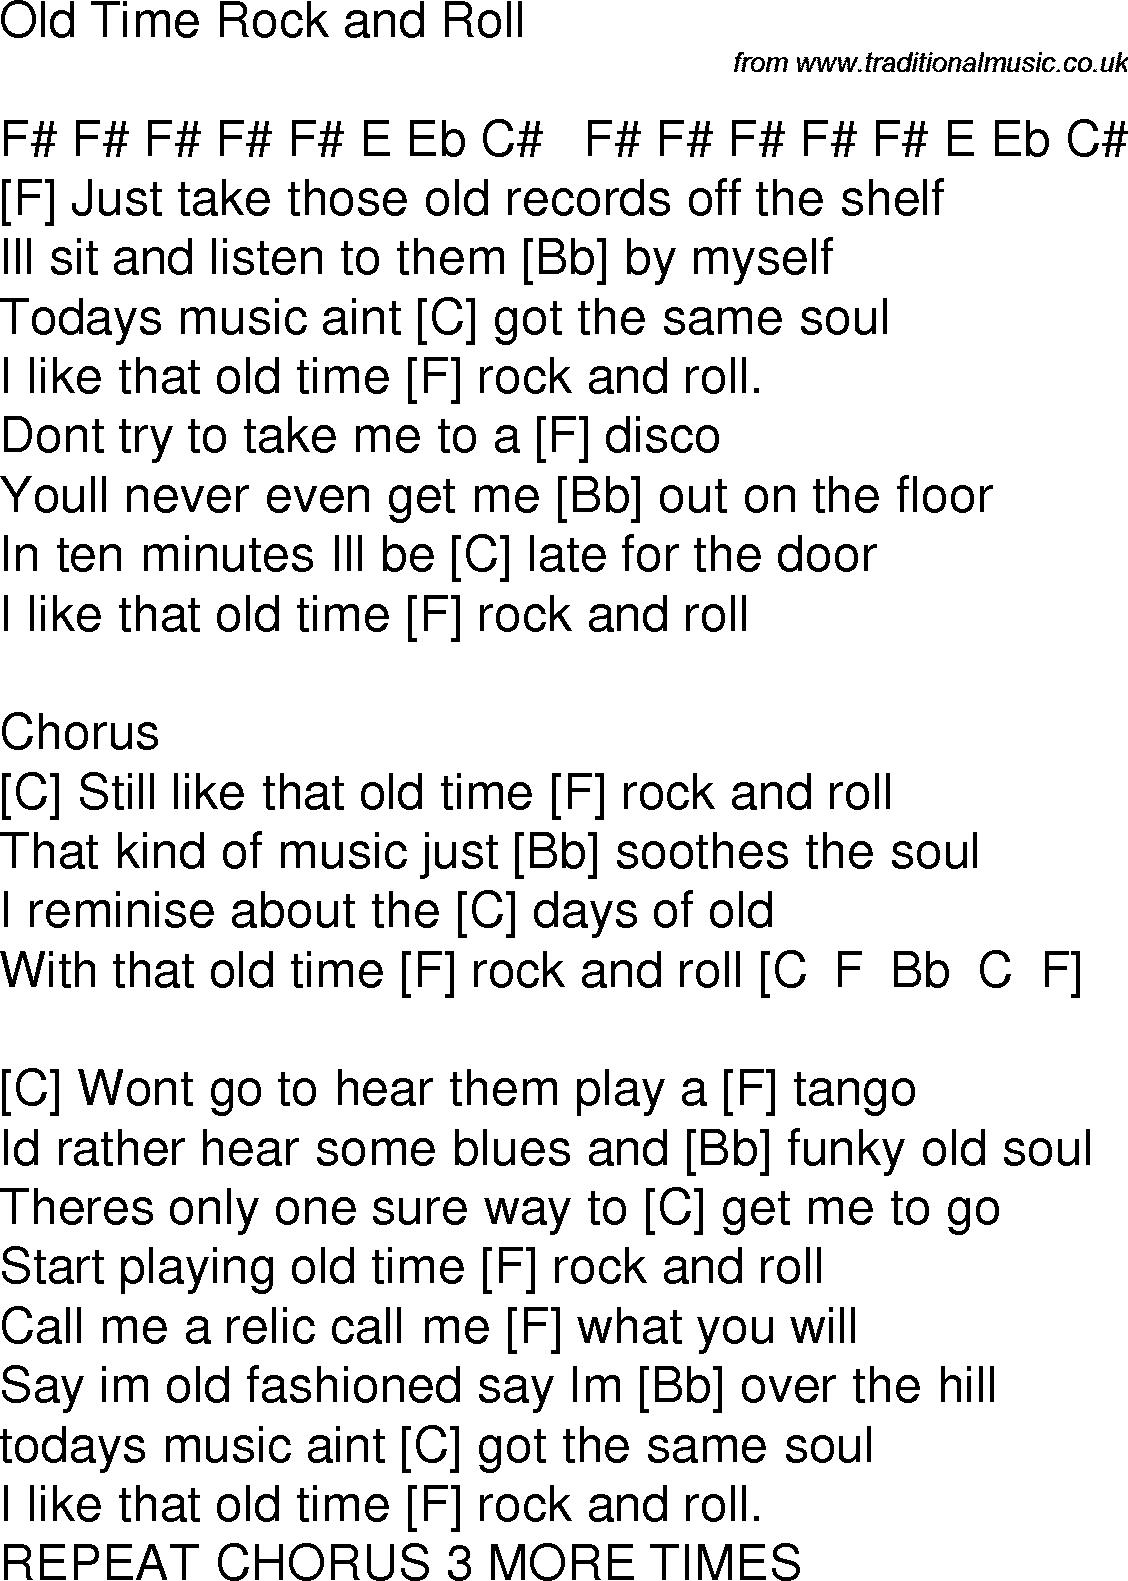 Old time song lyrics with chords for Old Time Rock And Roll F